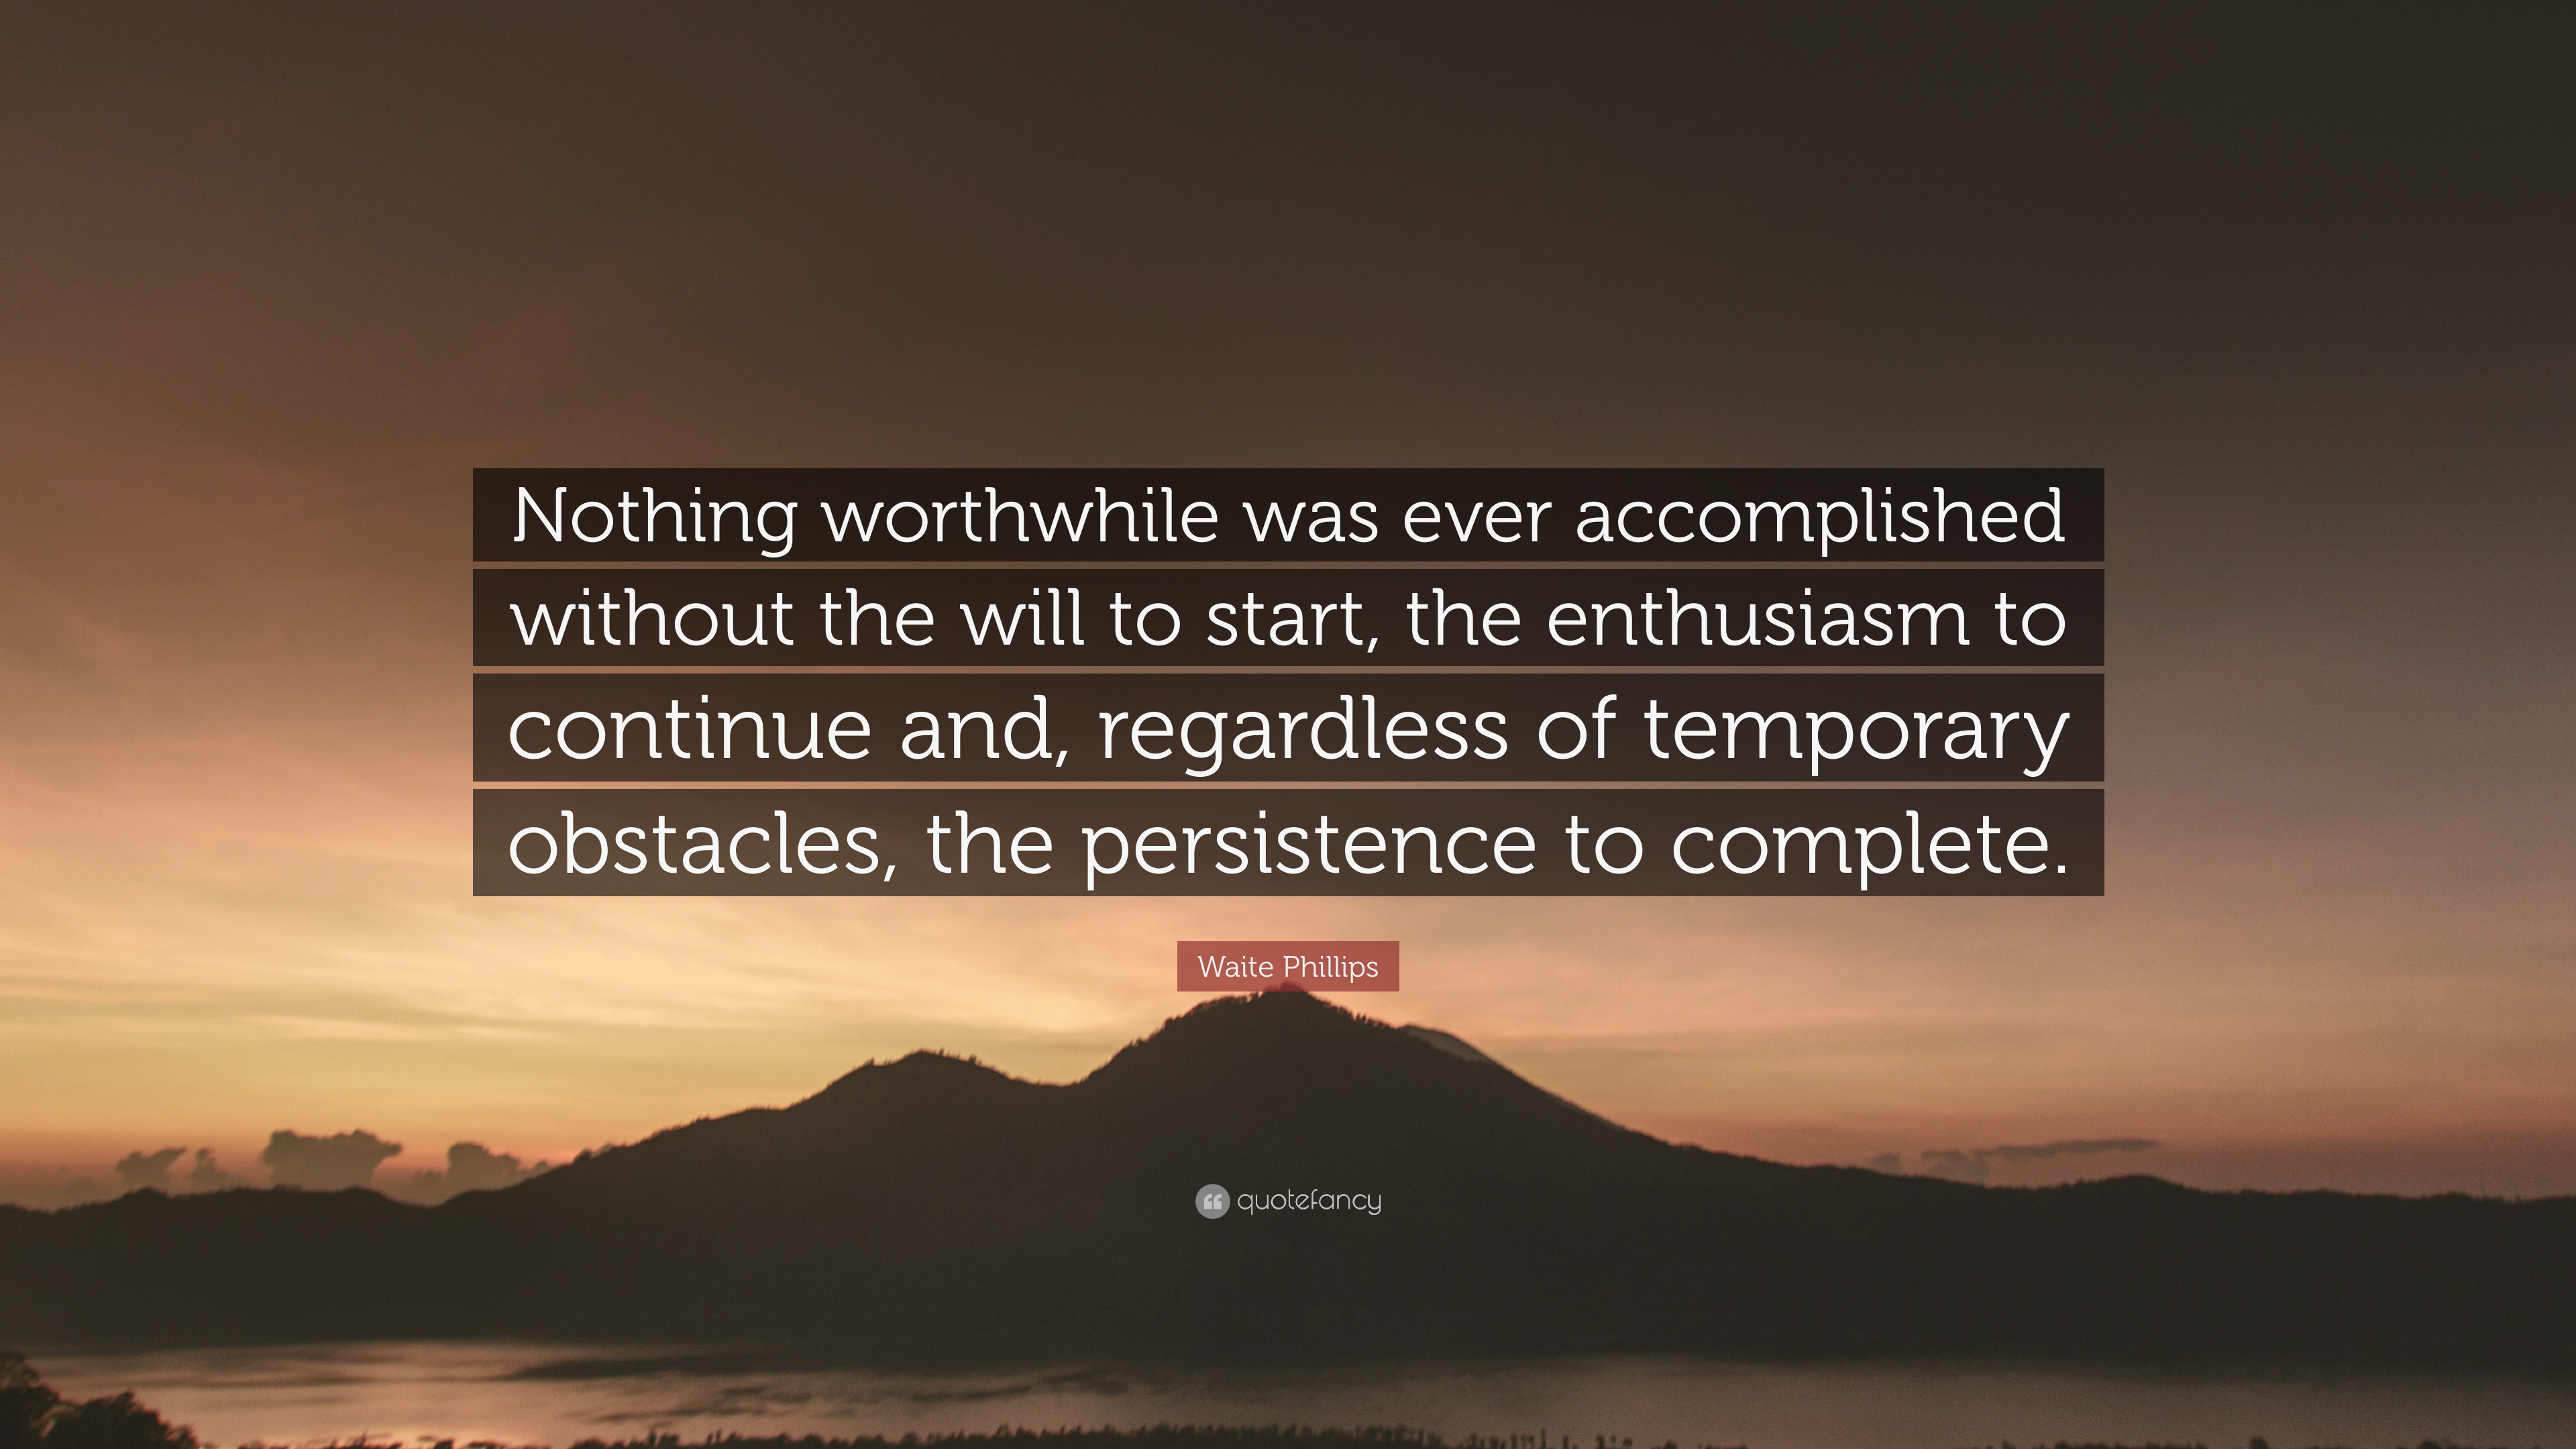 Waite Phillips Quote: “Nothing worthwhile was ever accomplished without ...